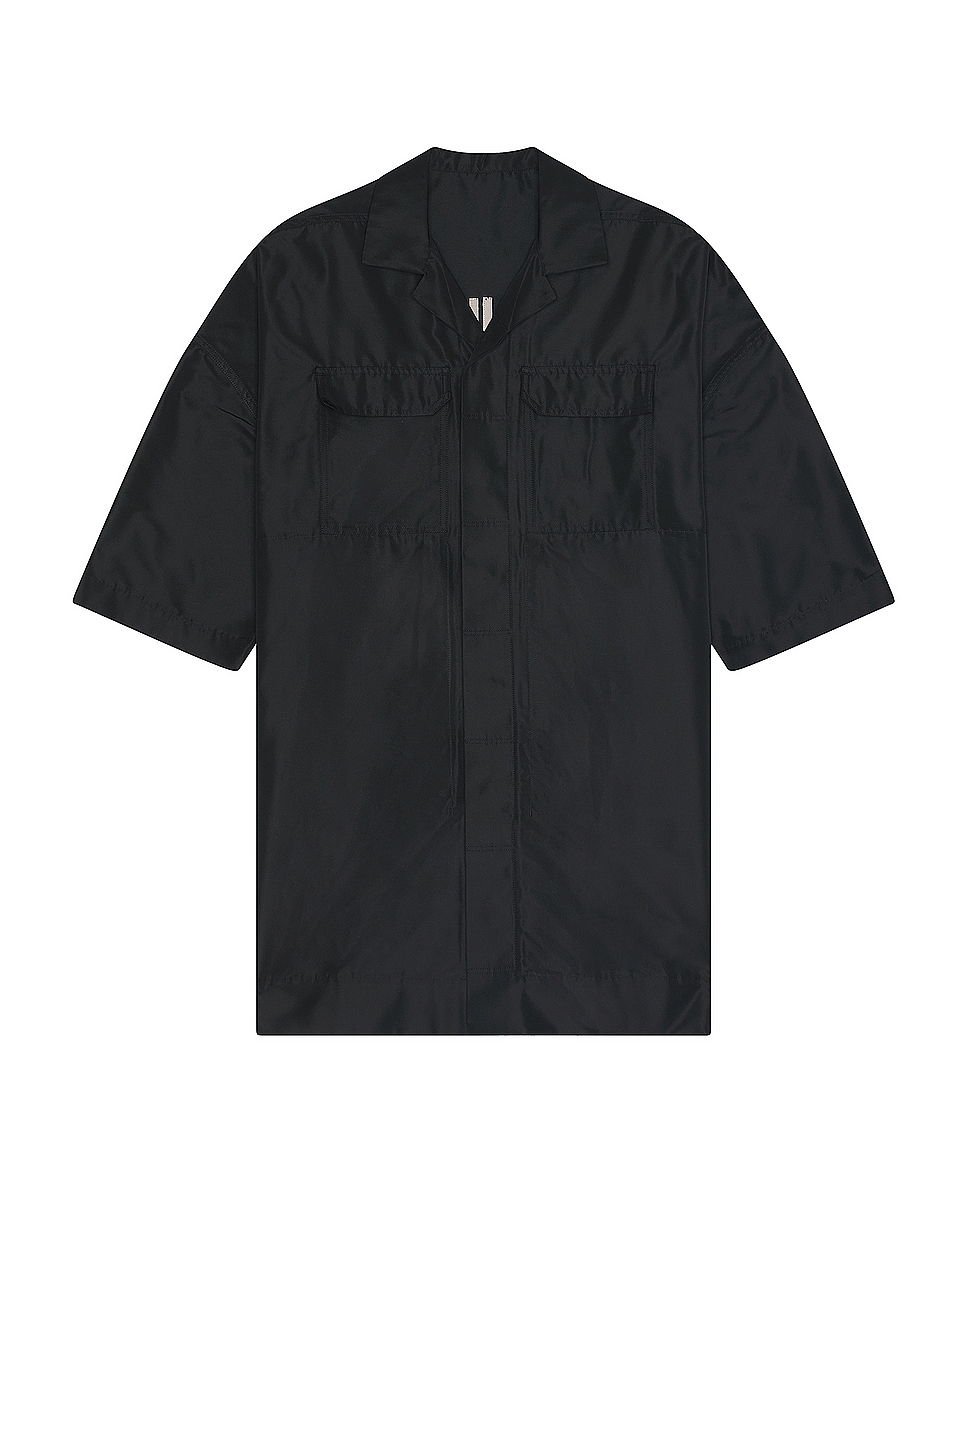 Image 1 of Rick Owens Magnum Tommy Shirt in Black